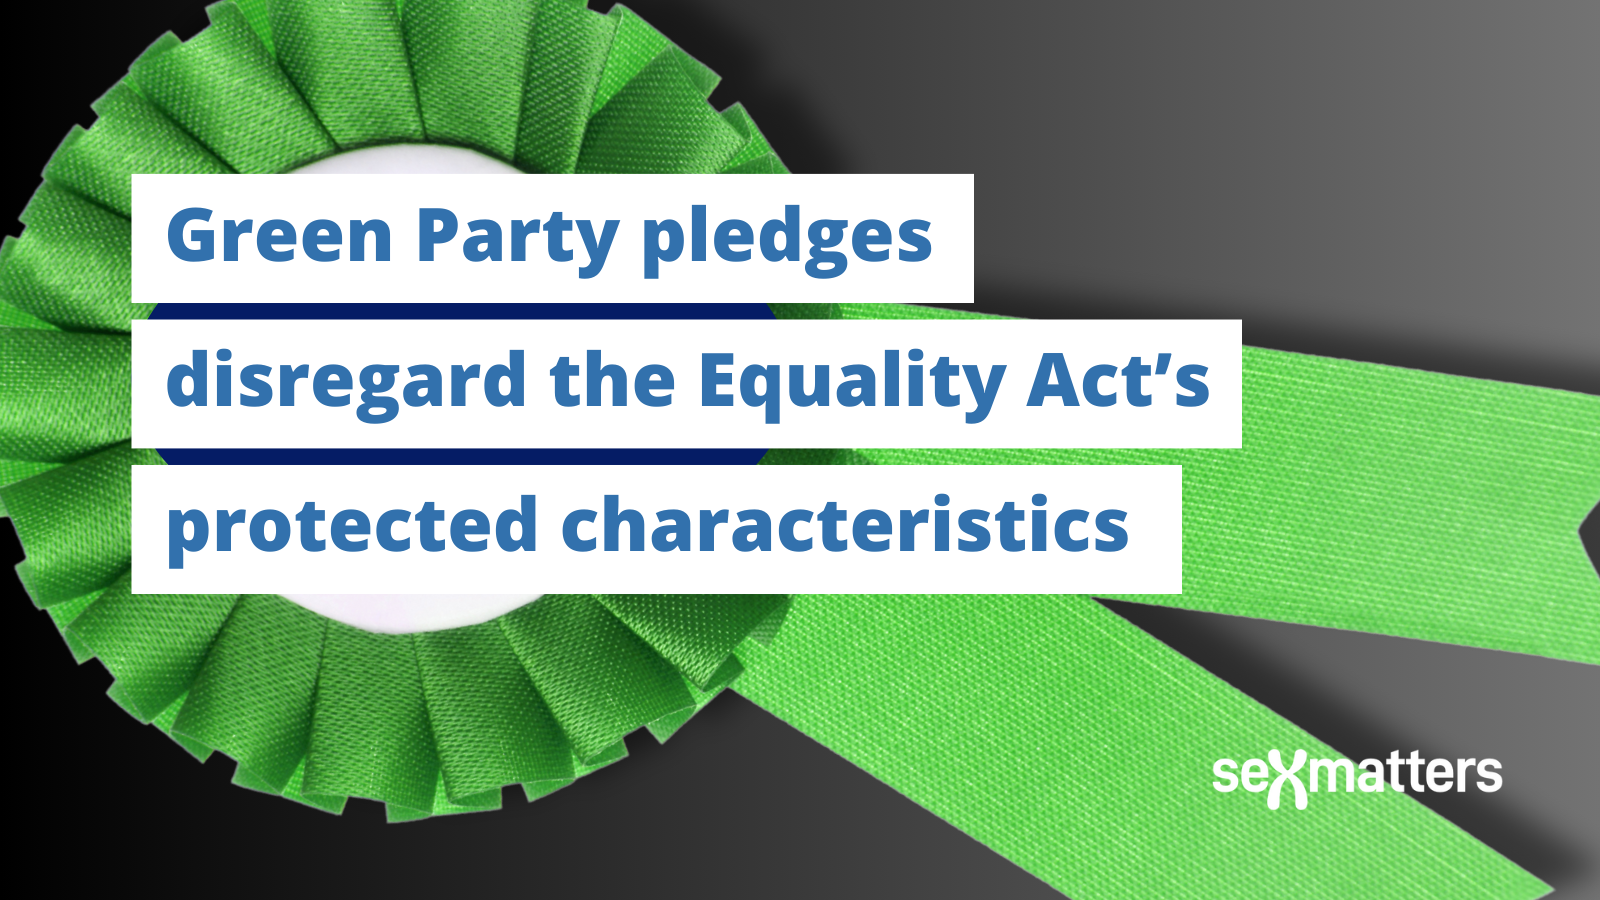 Green Party pledges disregard the Equality Act’s protected characteristics